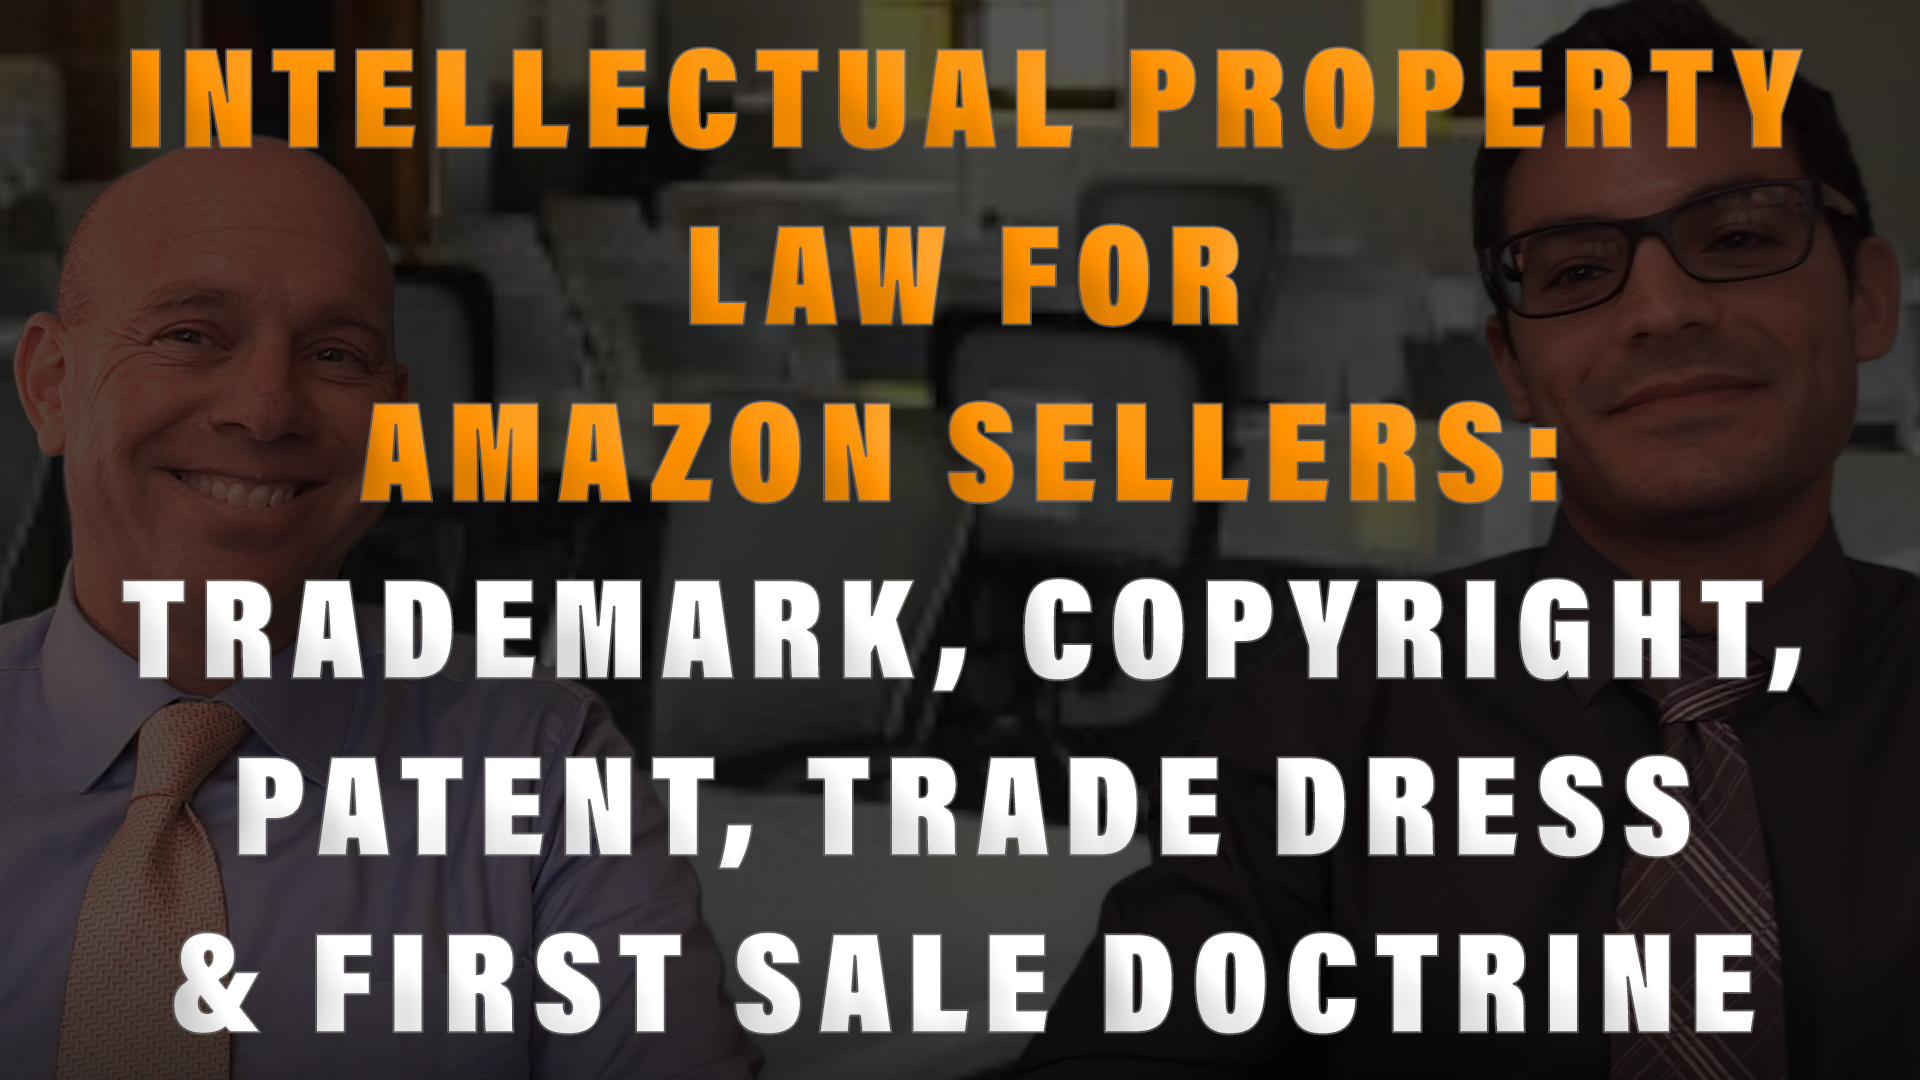 Basic Intellectual Property Law for Amazon Sellers Trademark, Copyright, Patent, Trade Dress and First Sale Doctrine